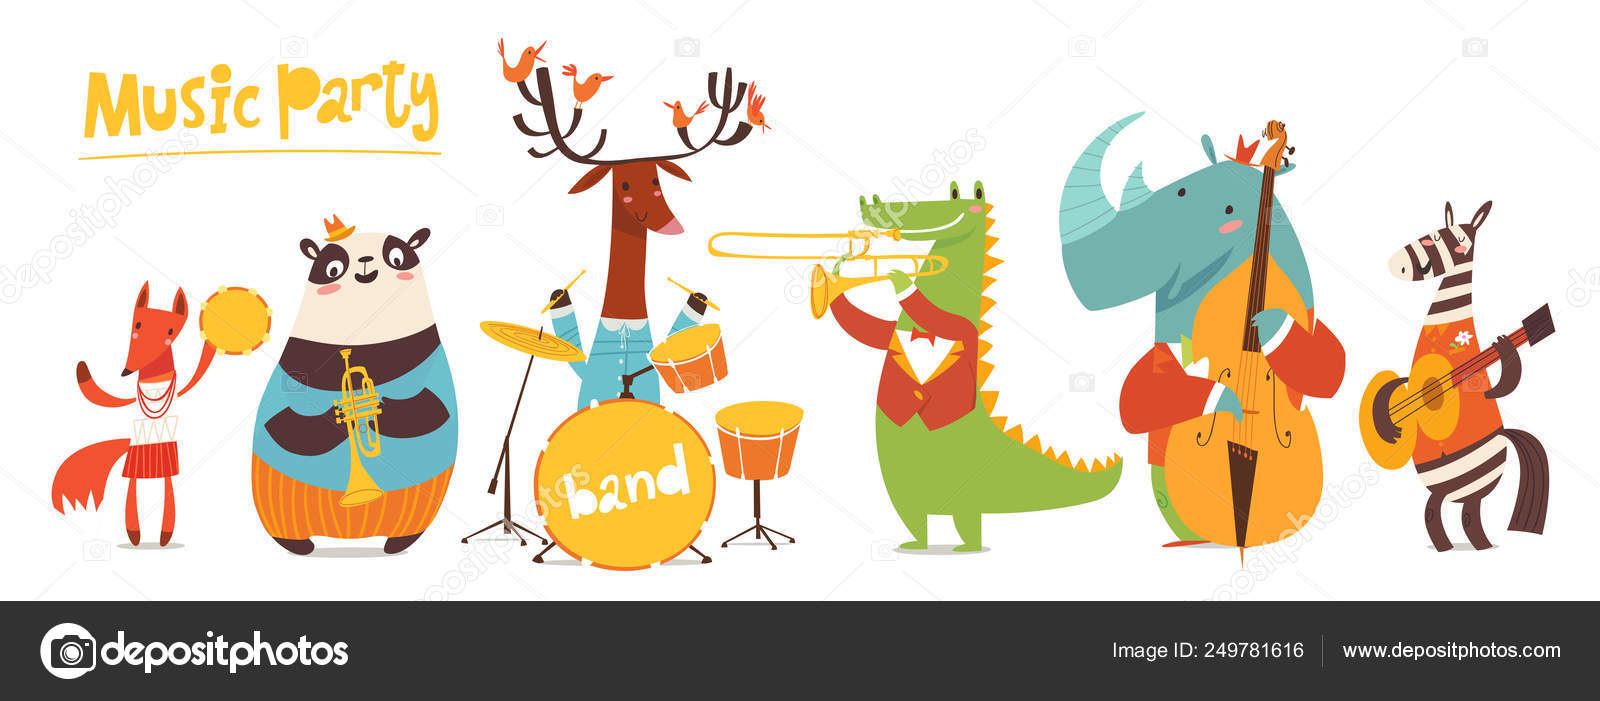 Animals with instruments Vector Art Stock Images | Depositphotos